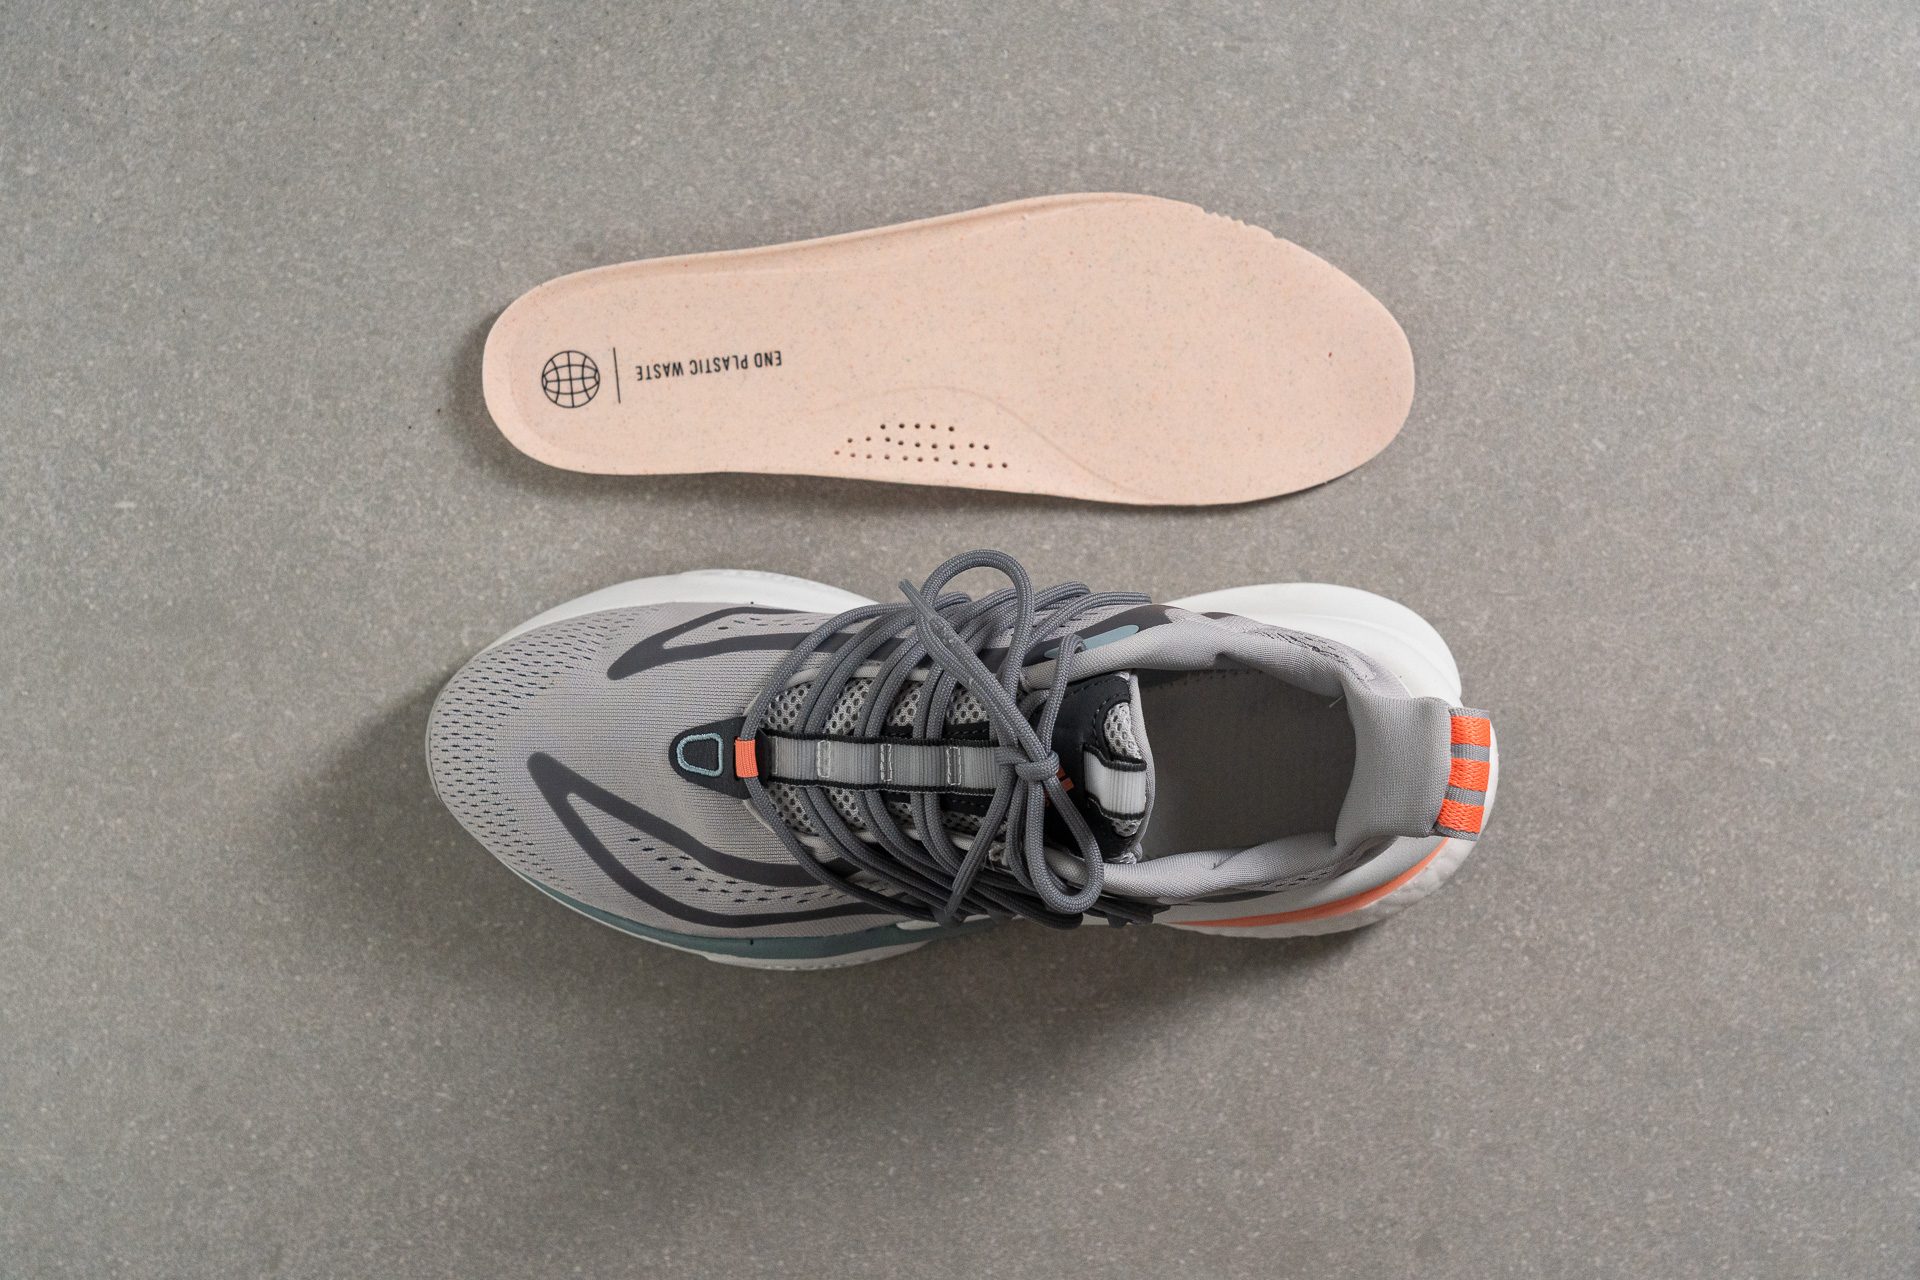 Adidas Alphaboost V1 Removable insole